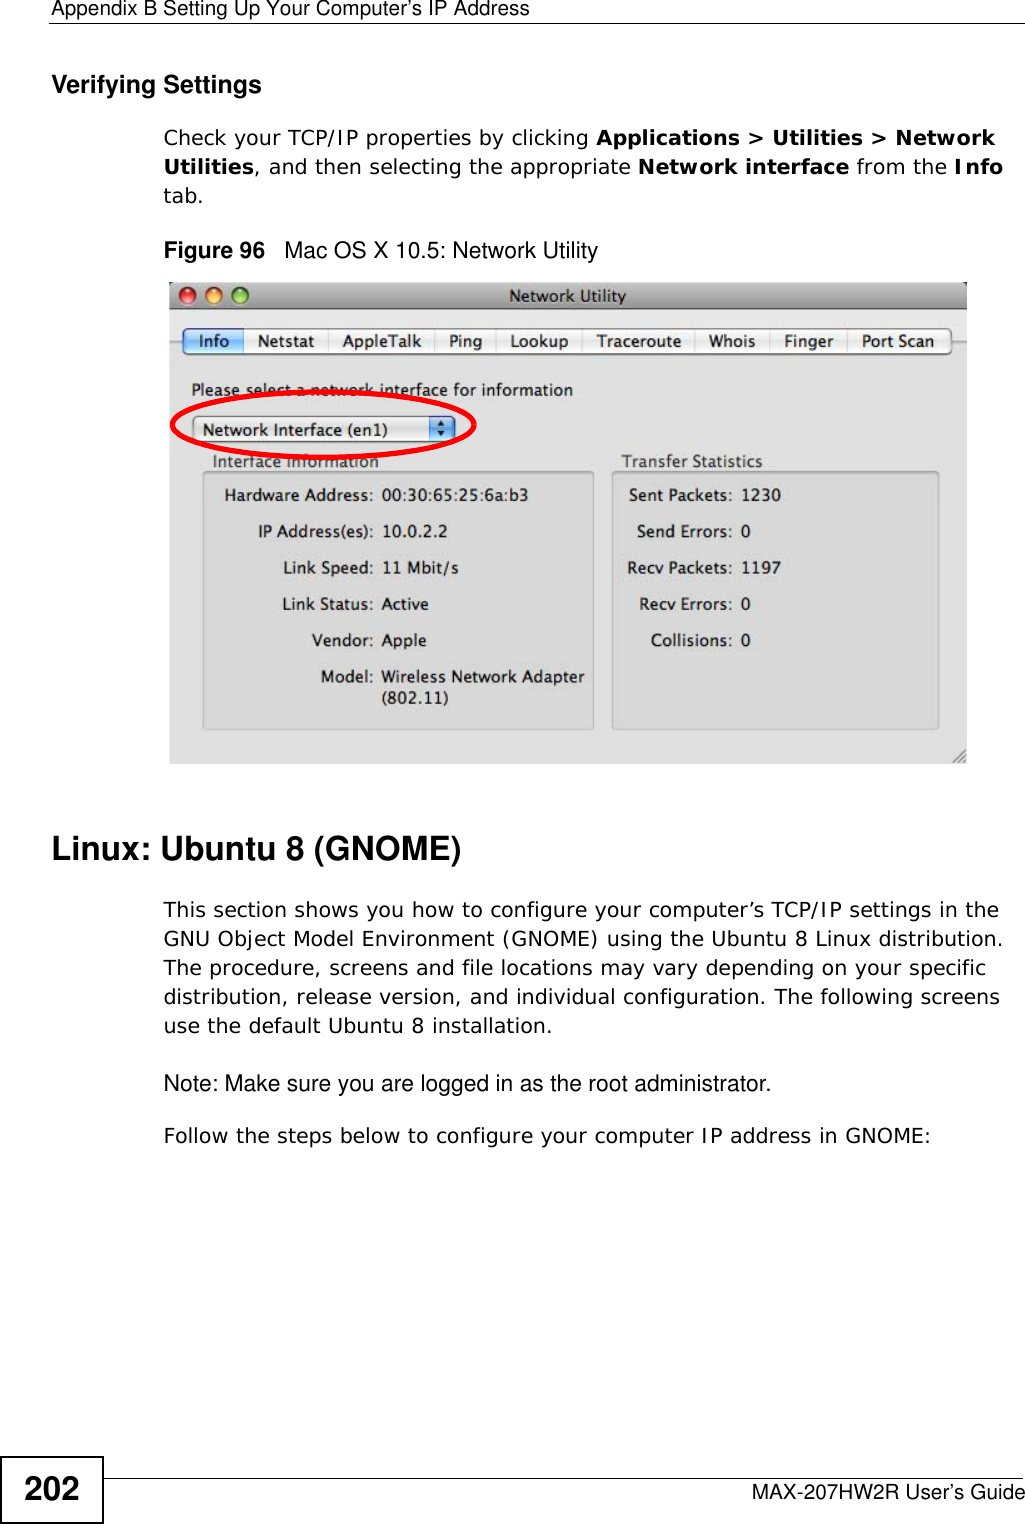 Appendix B Setting Up Your Computer’s IP AddressMAX-207HW2R User’s Guide202Verifying SettingsCheck your TCP/IP properties by clicking Applications &gt; Utilities &gt; Network Utilities, and then selecting the appropriate Network interface from the Info tab.Figure 96   Mac OS X 10.5: Network UtilityLinux: Ubuntu 8 (GNOME)This section shows you how to configure your computer’s TCP/IP settings in the GNU Object Model Environment (GNOME) using the Ubuntu 8 Linux distribution. The procedure, screens and file locations may vary depending on your specific distribution, release version, and individual configuration. The following screens use the default Ubuntu 8 installation.Note: Make sure you are logged in as the root administrator. Follow the steps below to configure your computer IP address in GNOME: 